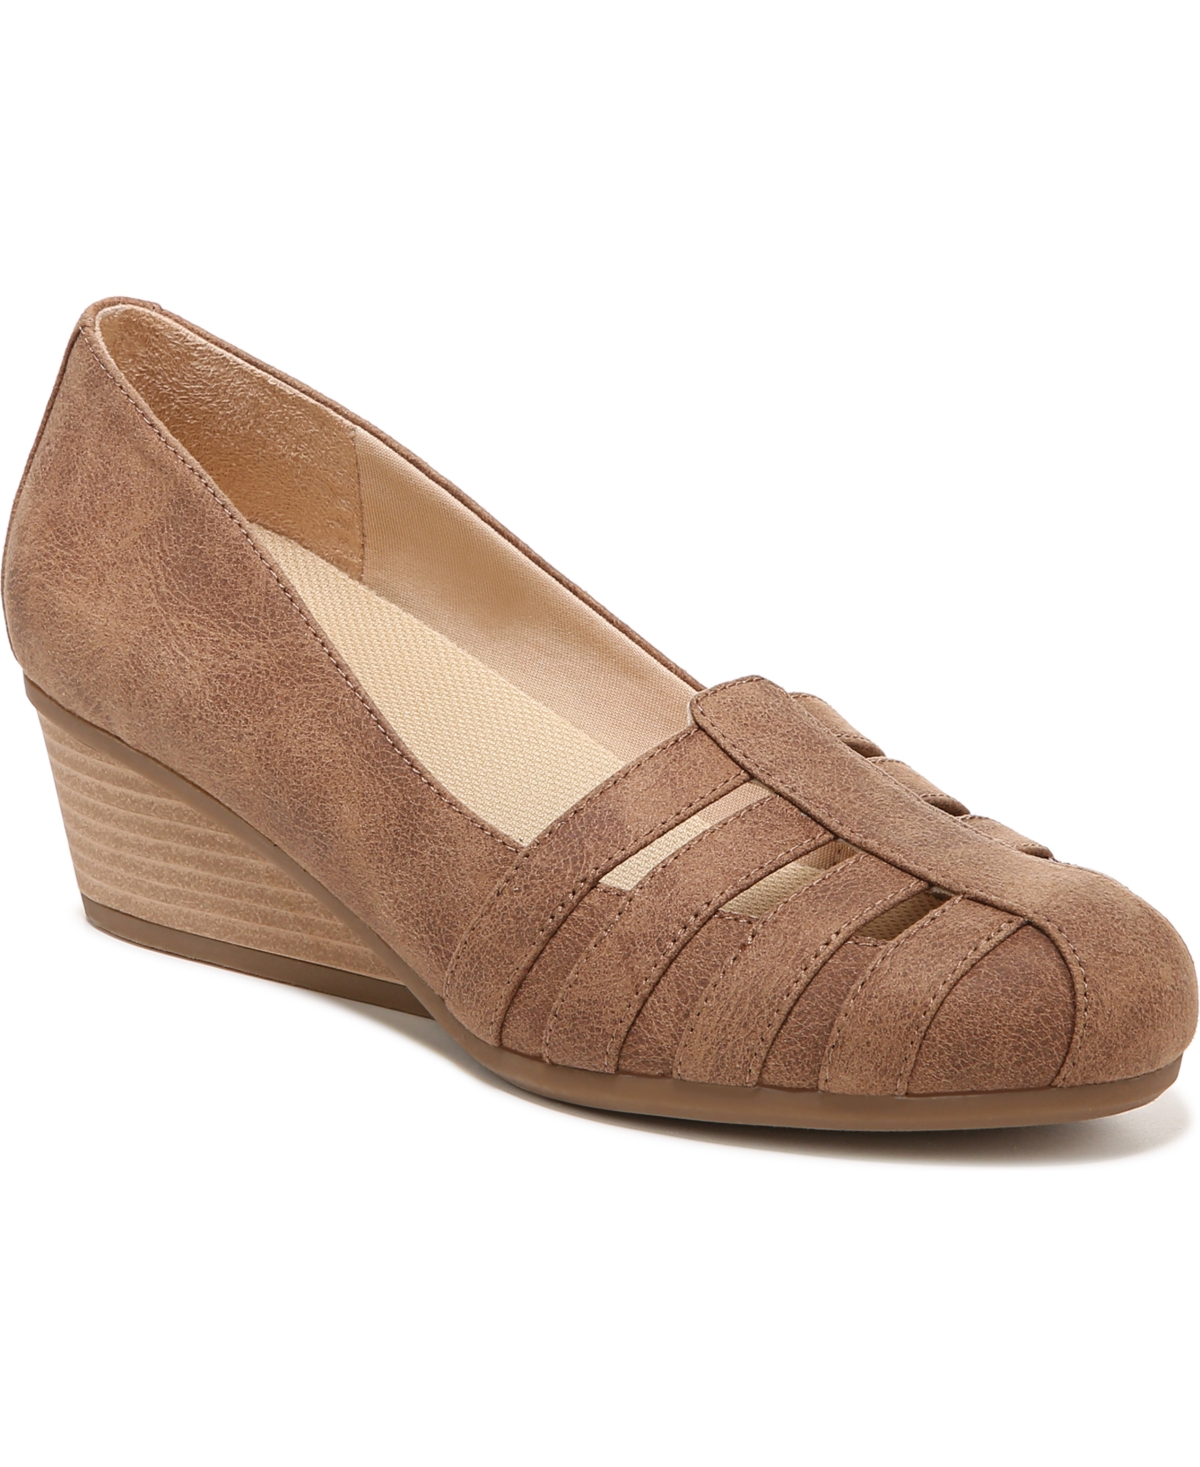 Dr. Scholl's Women's Be Free Wedge Pumps In Sand